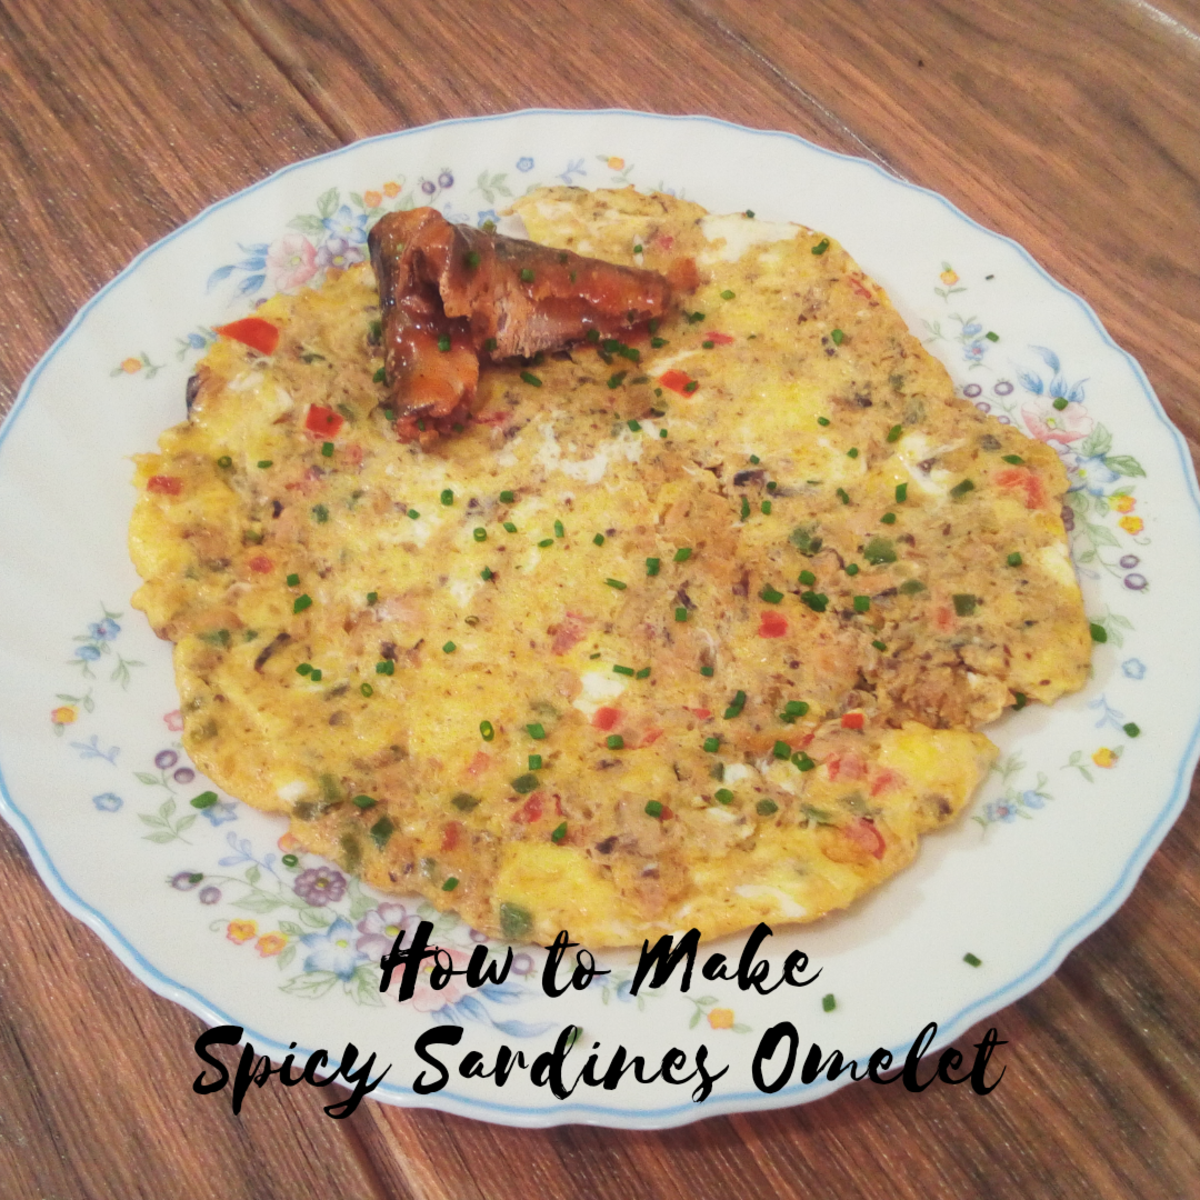 How to Make a Spicy Sardine Omelet